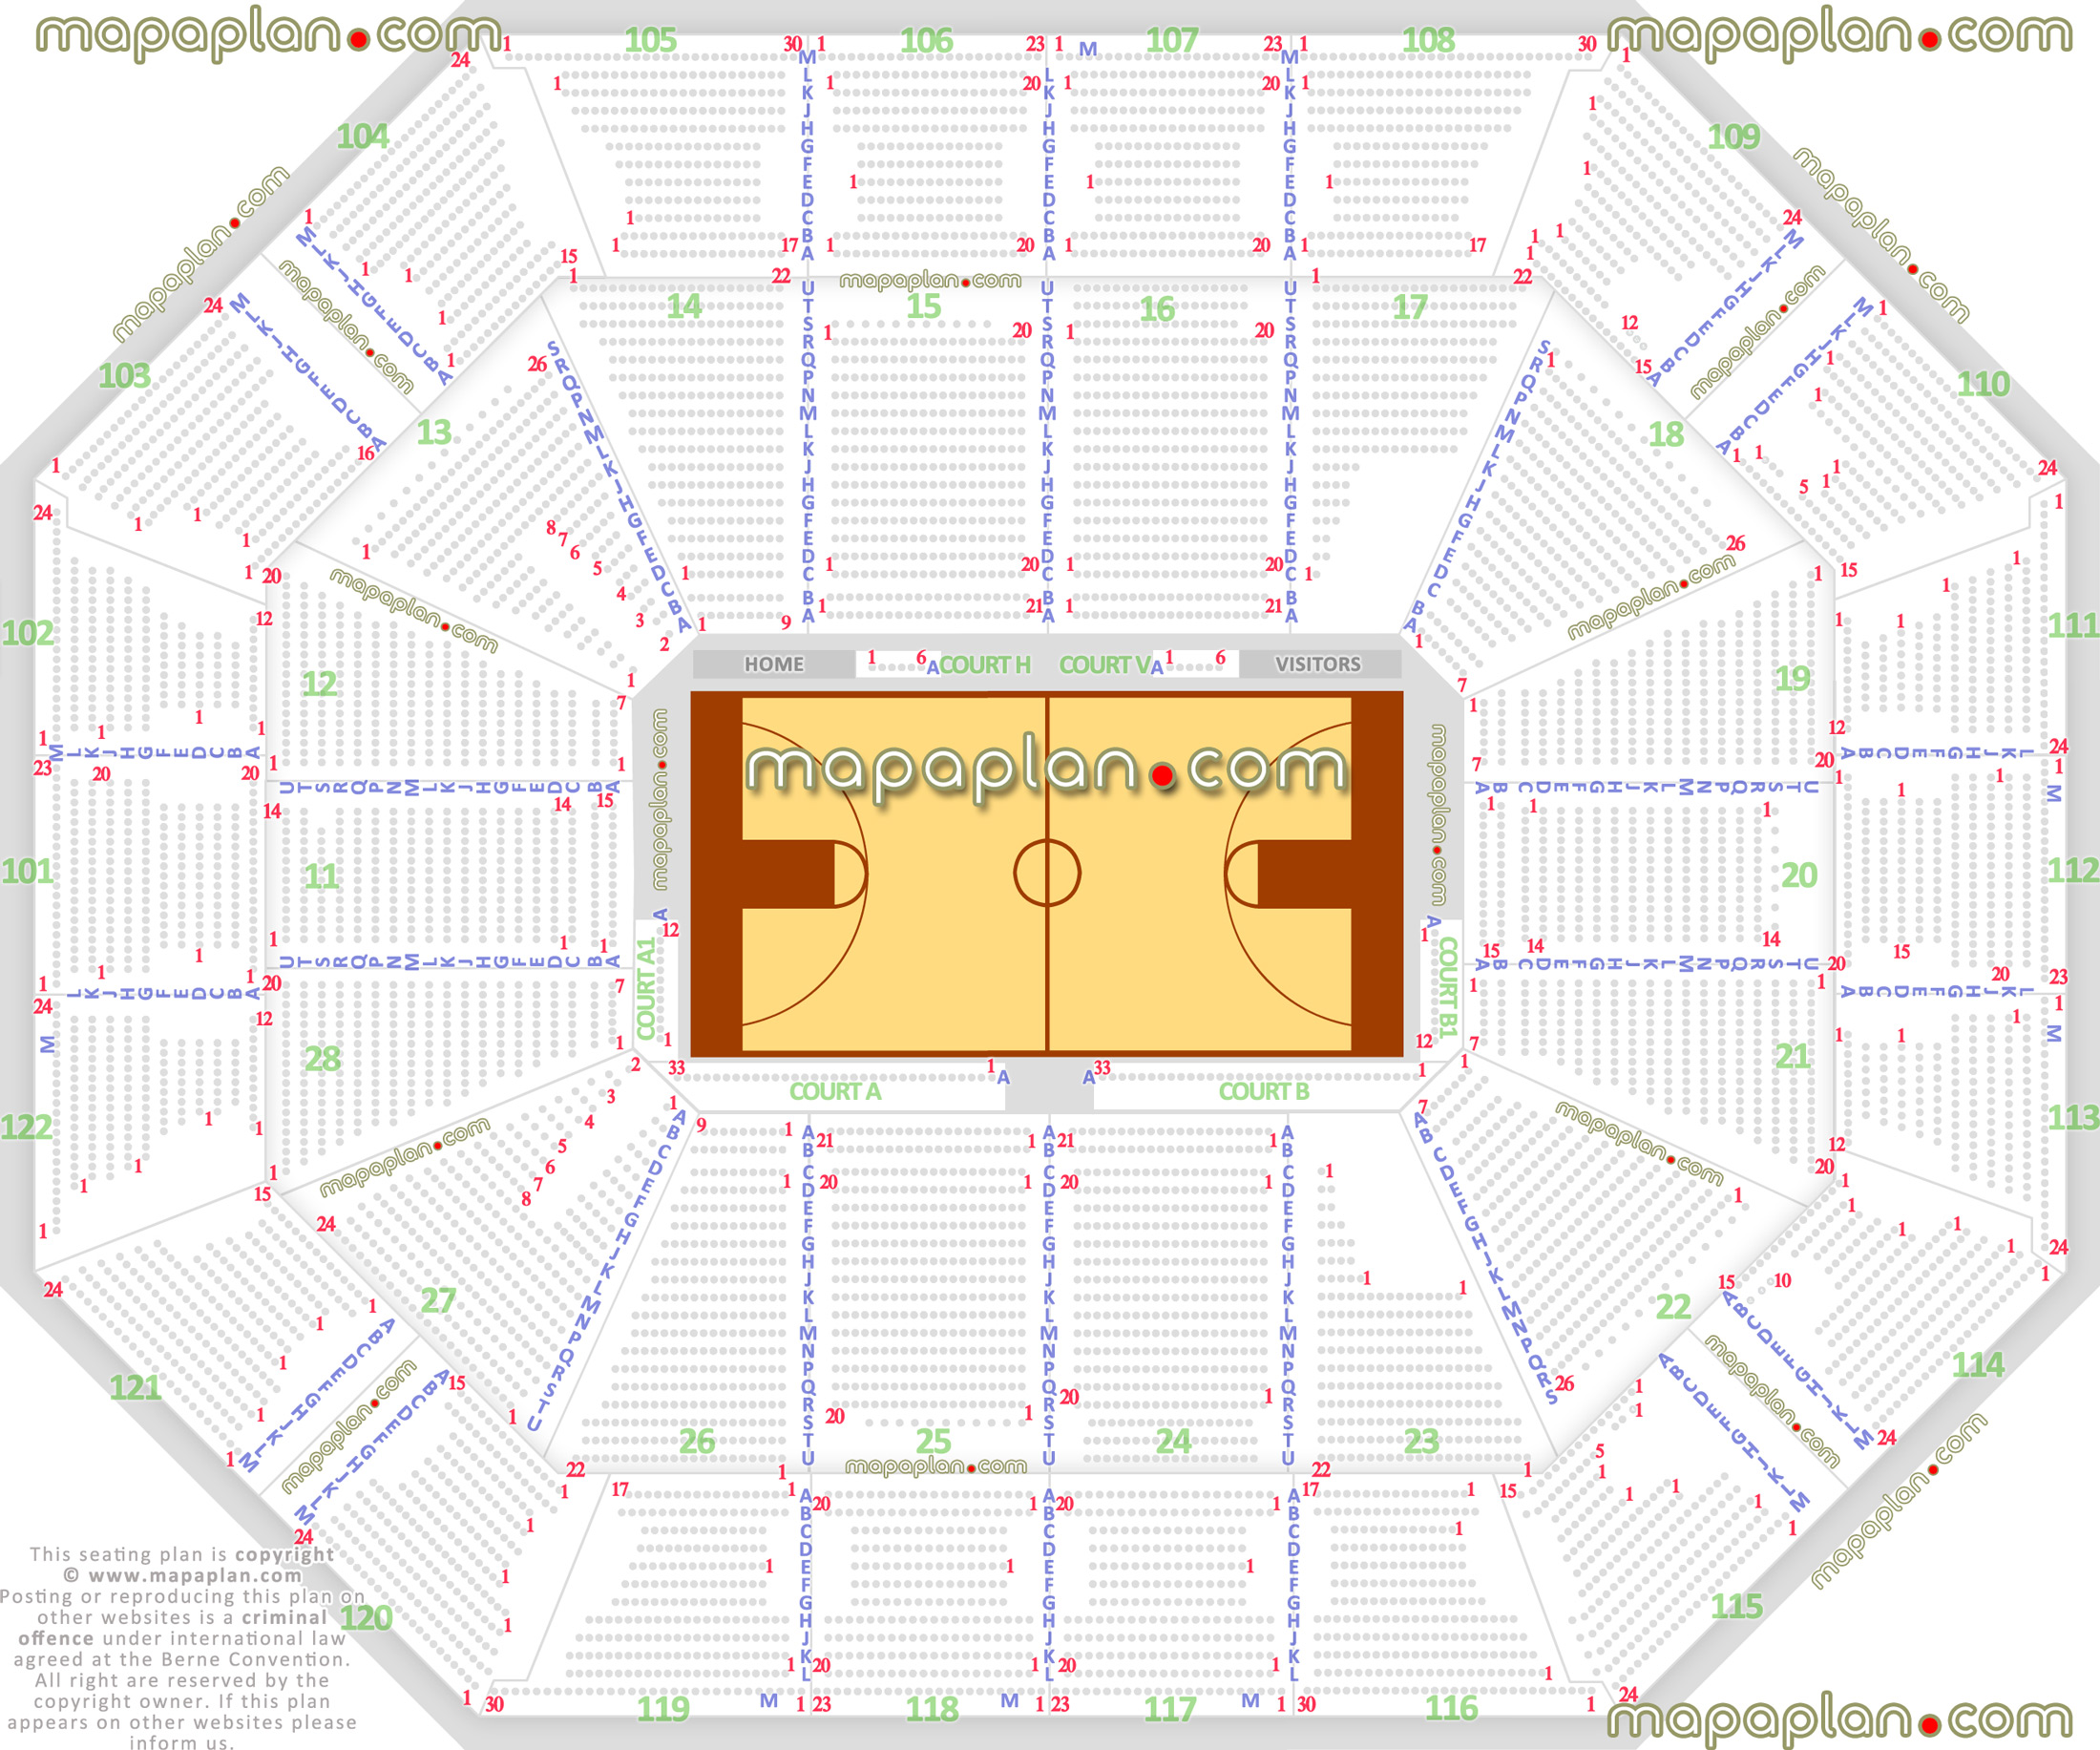 connecticut sun wnba uconn ncaa basketball game casino arena stadium map individual find my seat locator how rows numbered lower upper level bowl club Uncasville Mohegan Sun Arena seating chart